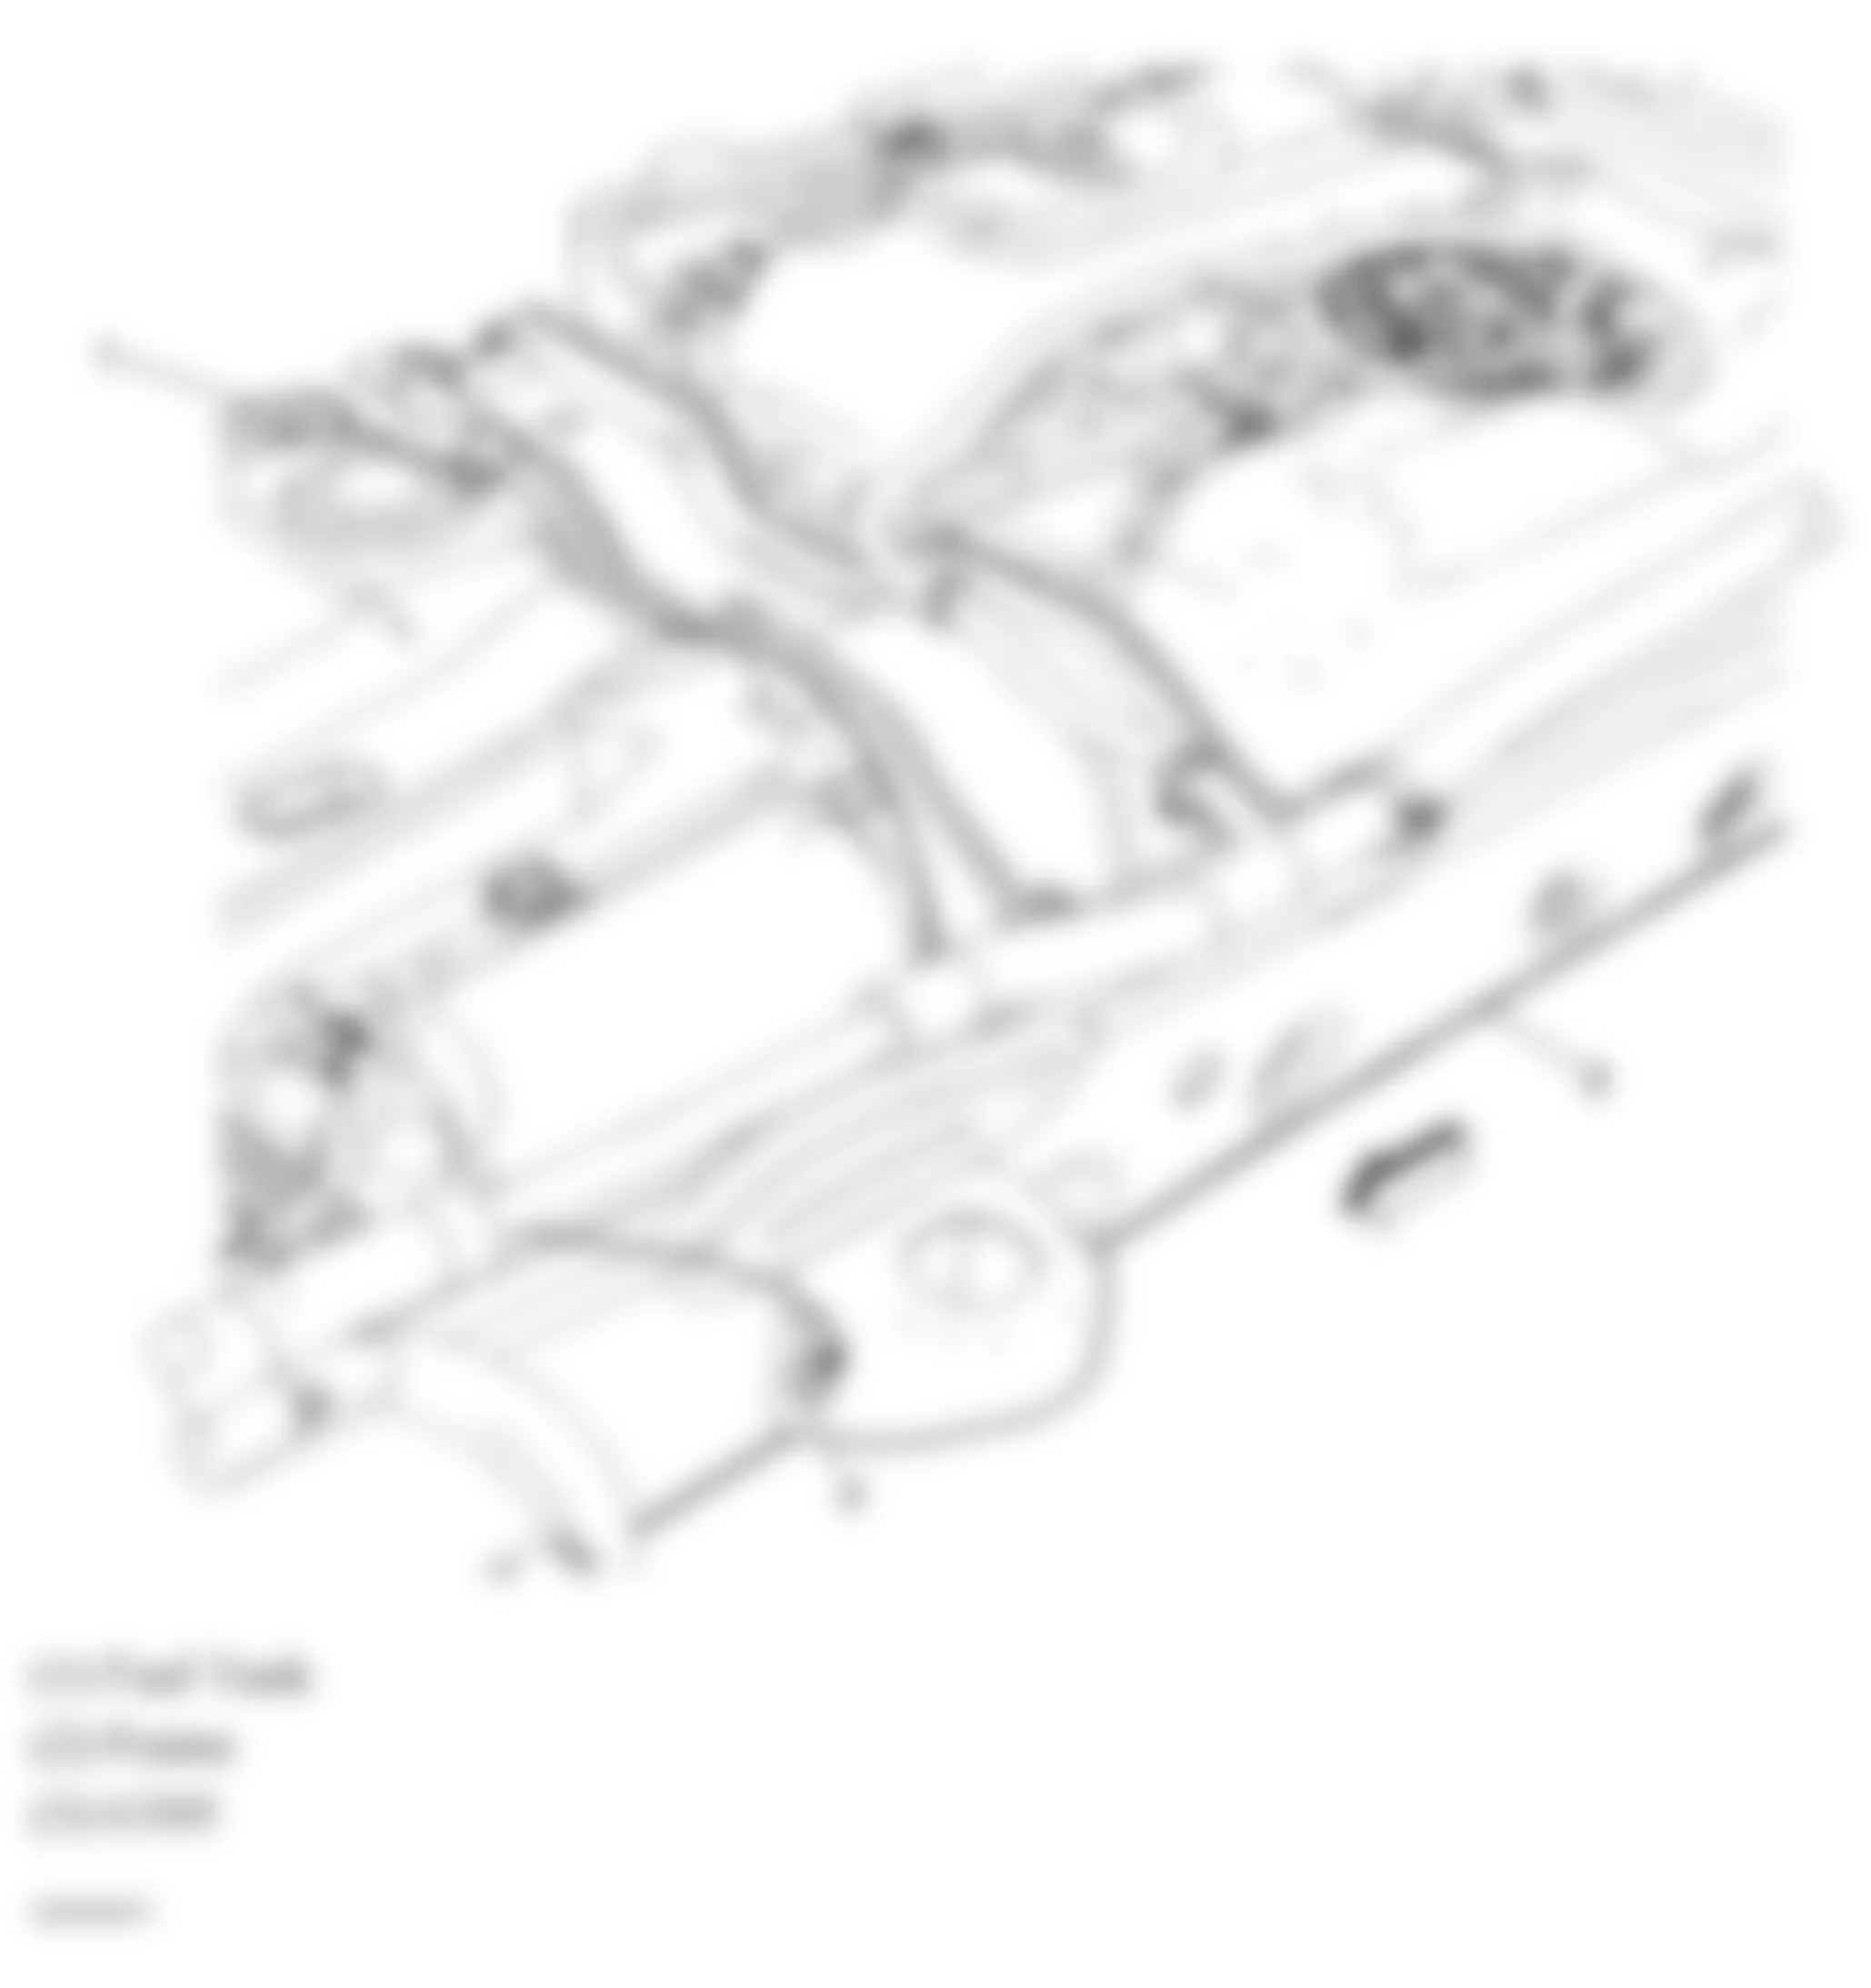 GMC Yukon XL C2500 2008 - Component Locations -  Rear Chassis